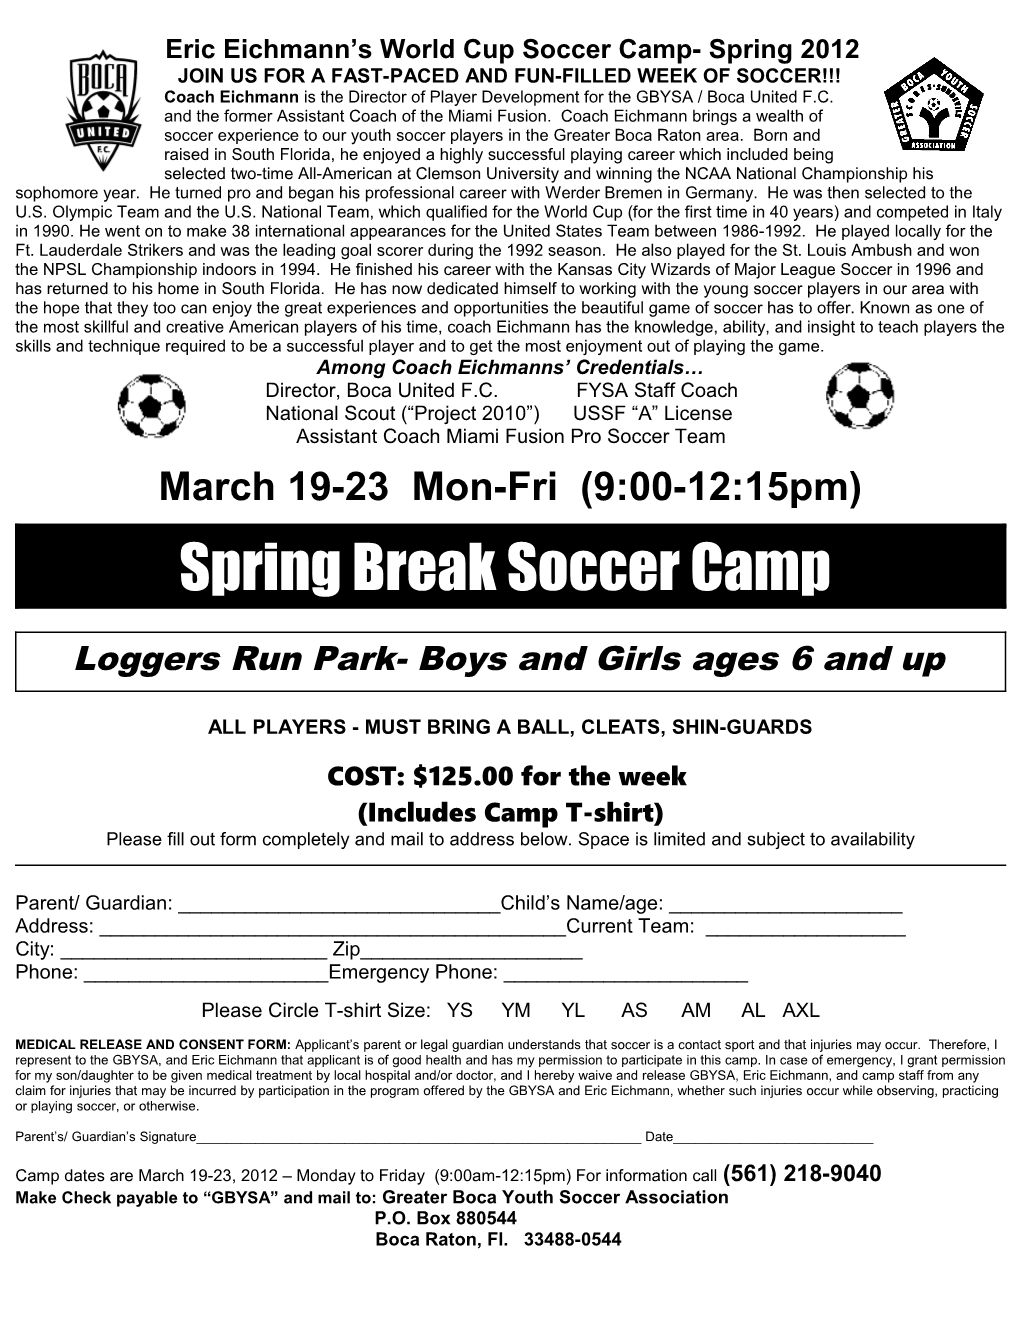 Greater Boca Youth Soccer Association and Boca United F.C